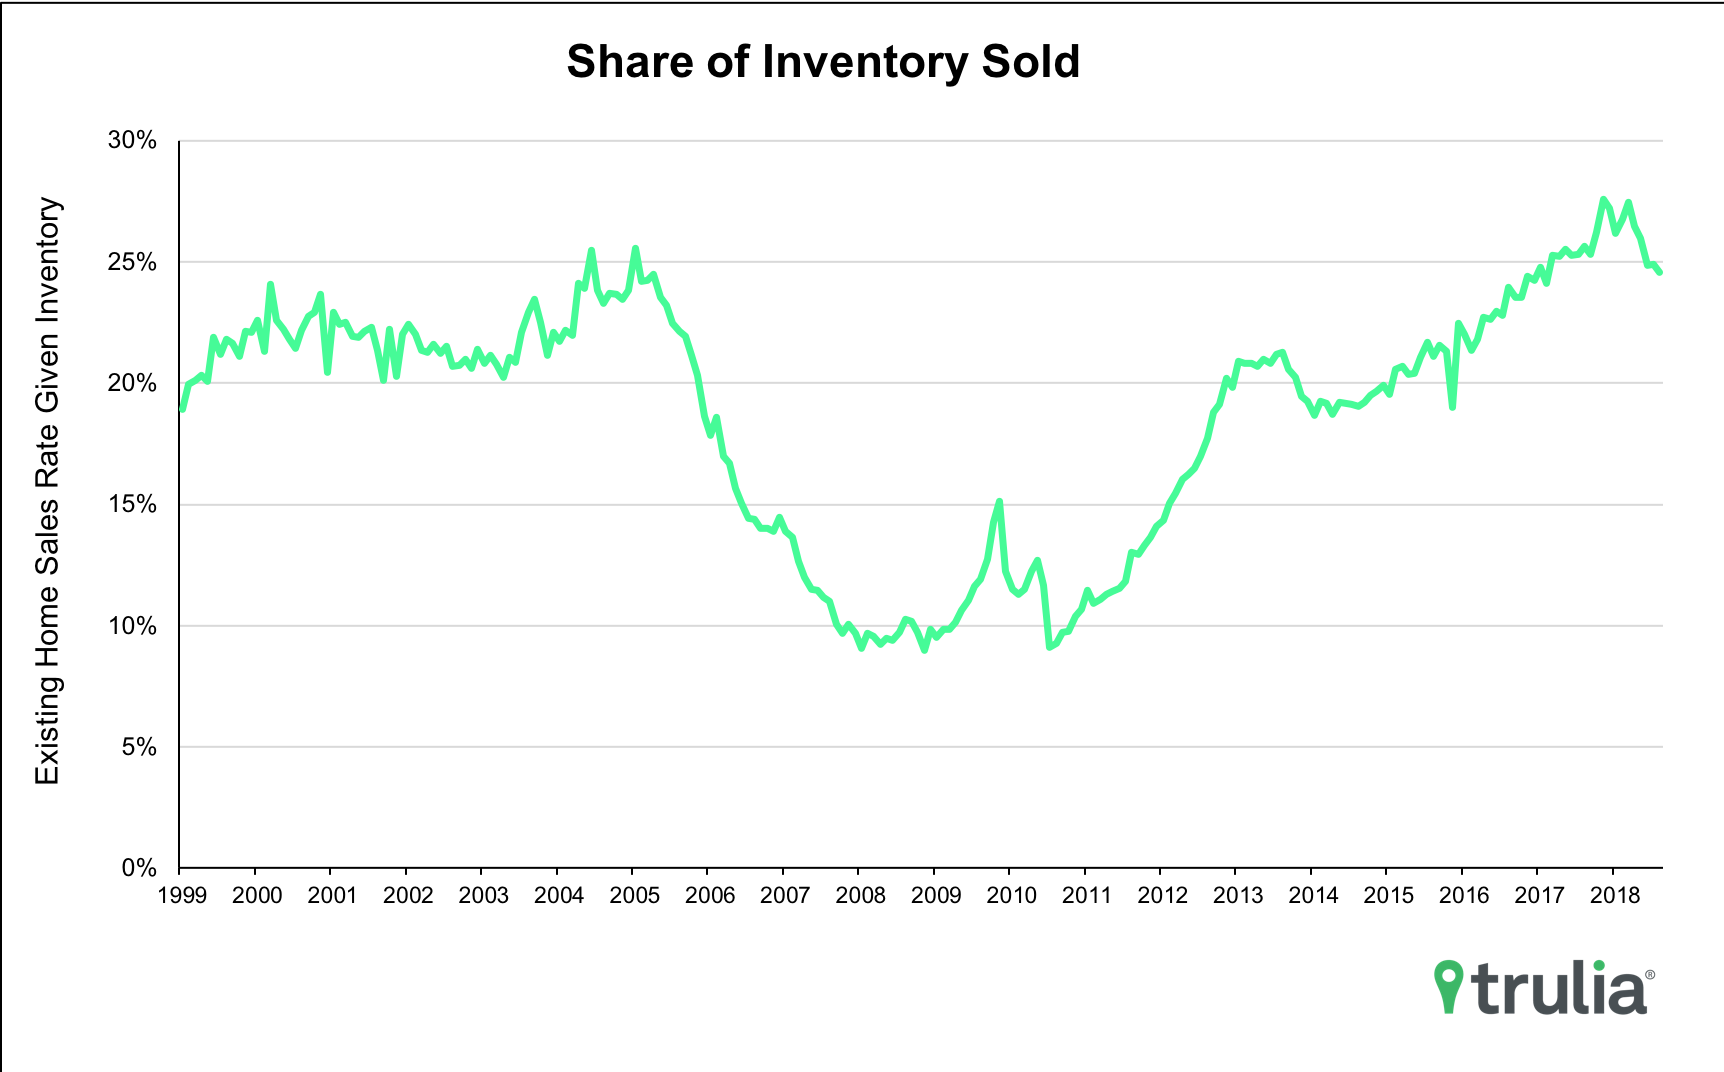 Share of Inventory Sold